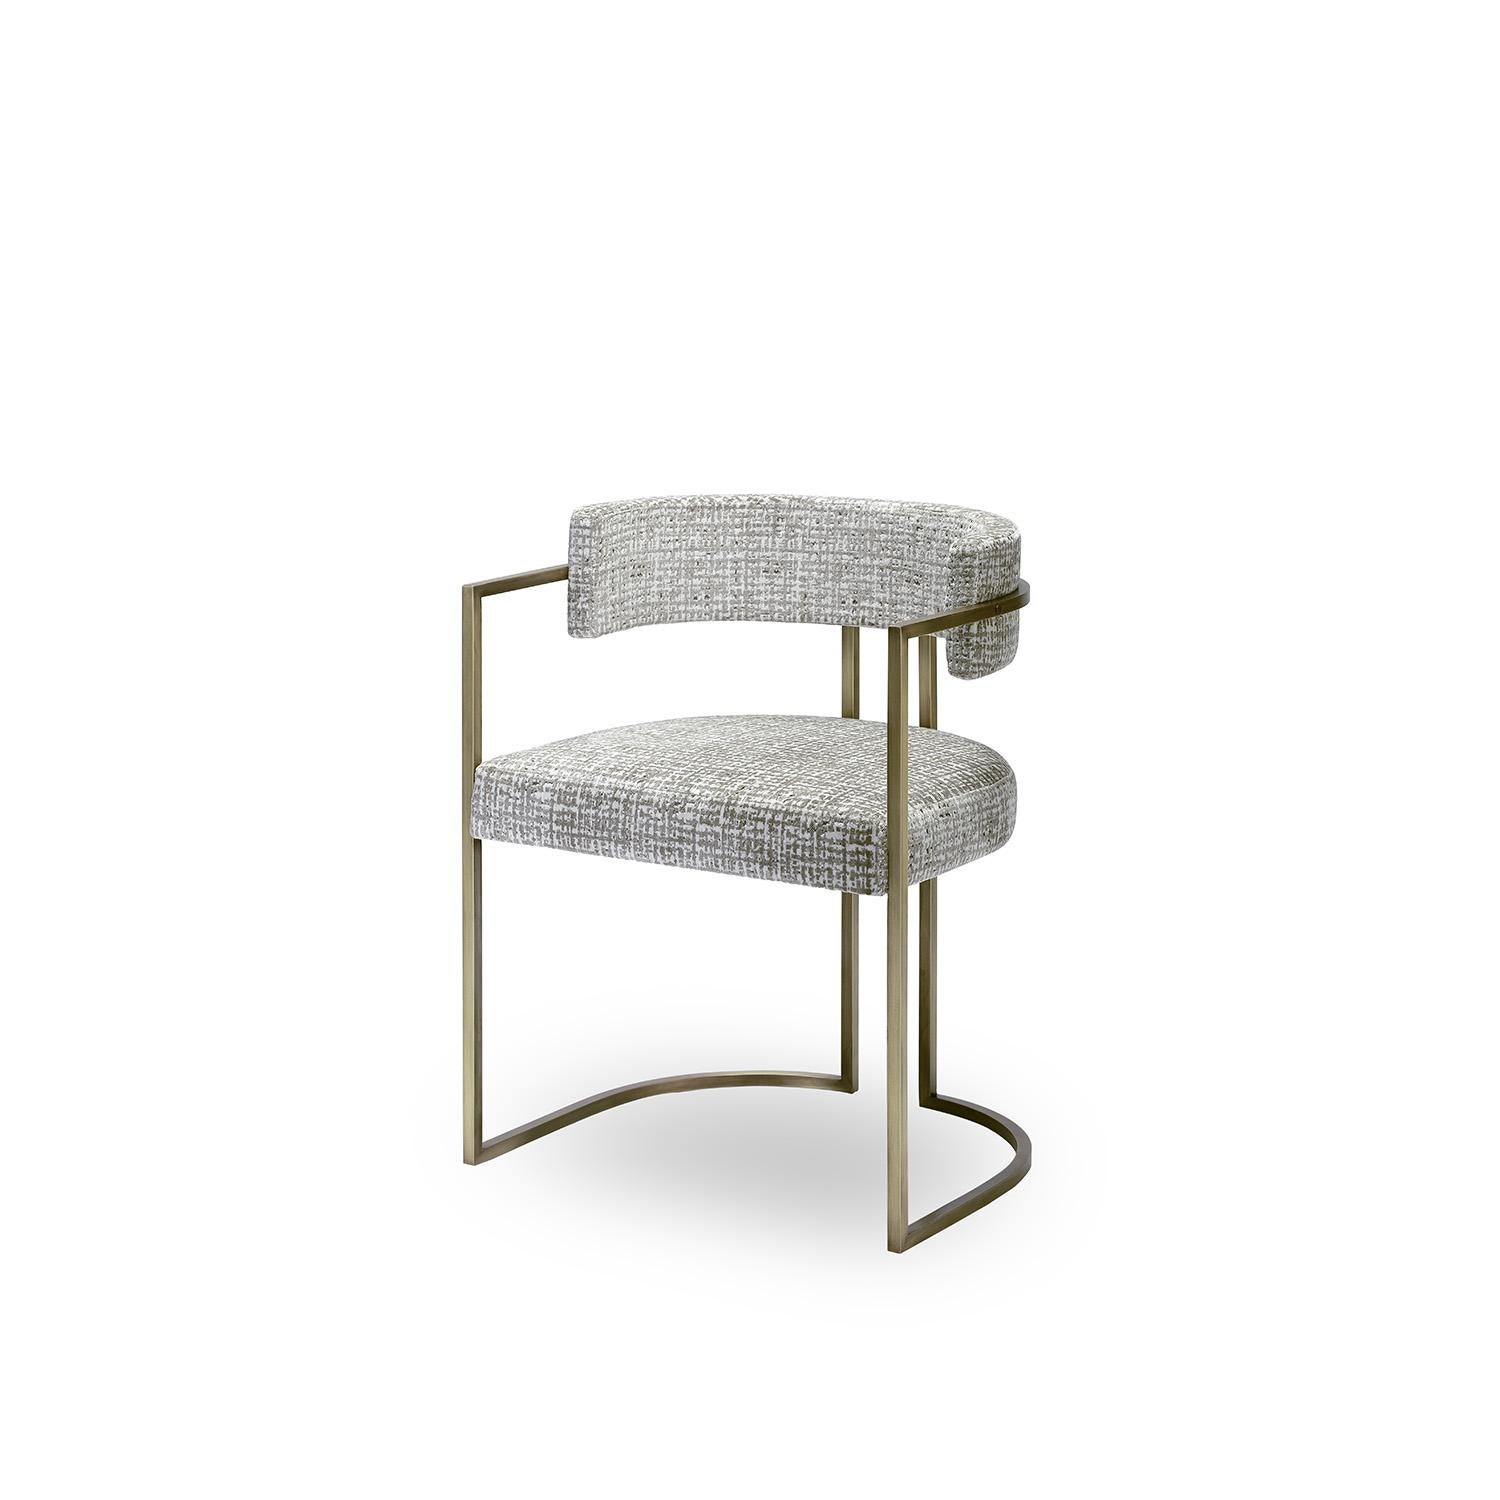 Small Brass Julius Chair by Duistt
Dimensions: W 55 x D 48 x H 75 cm
Materials: Duistt Fabric and Brass

The JULIUS small chair, crafted with great attention to detail, gives us clean and modern lines always with a strong craftsmanship presence like